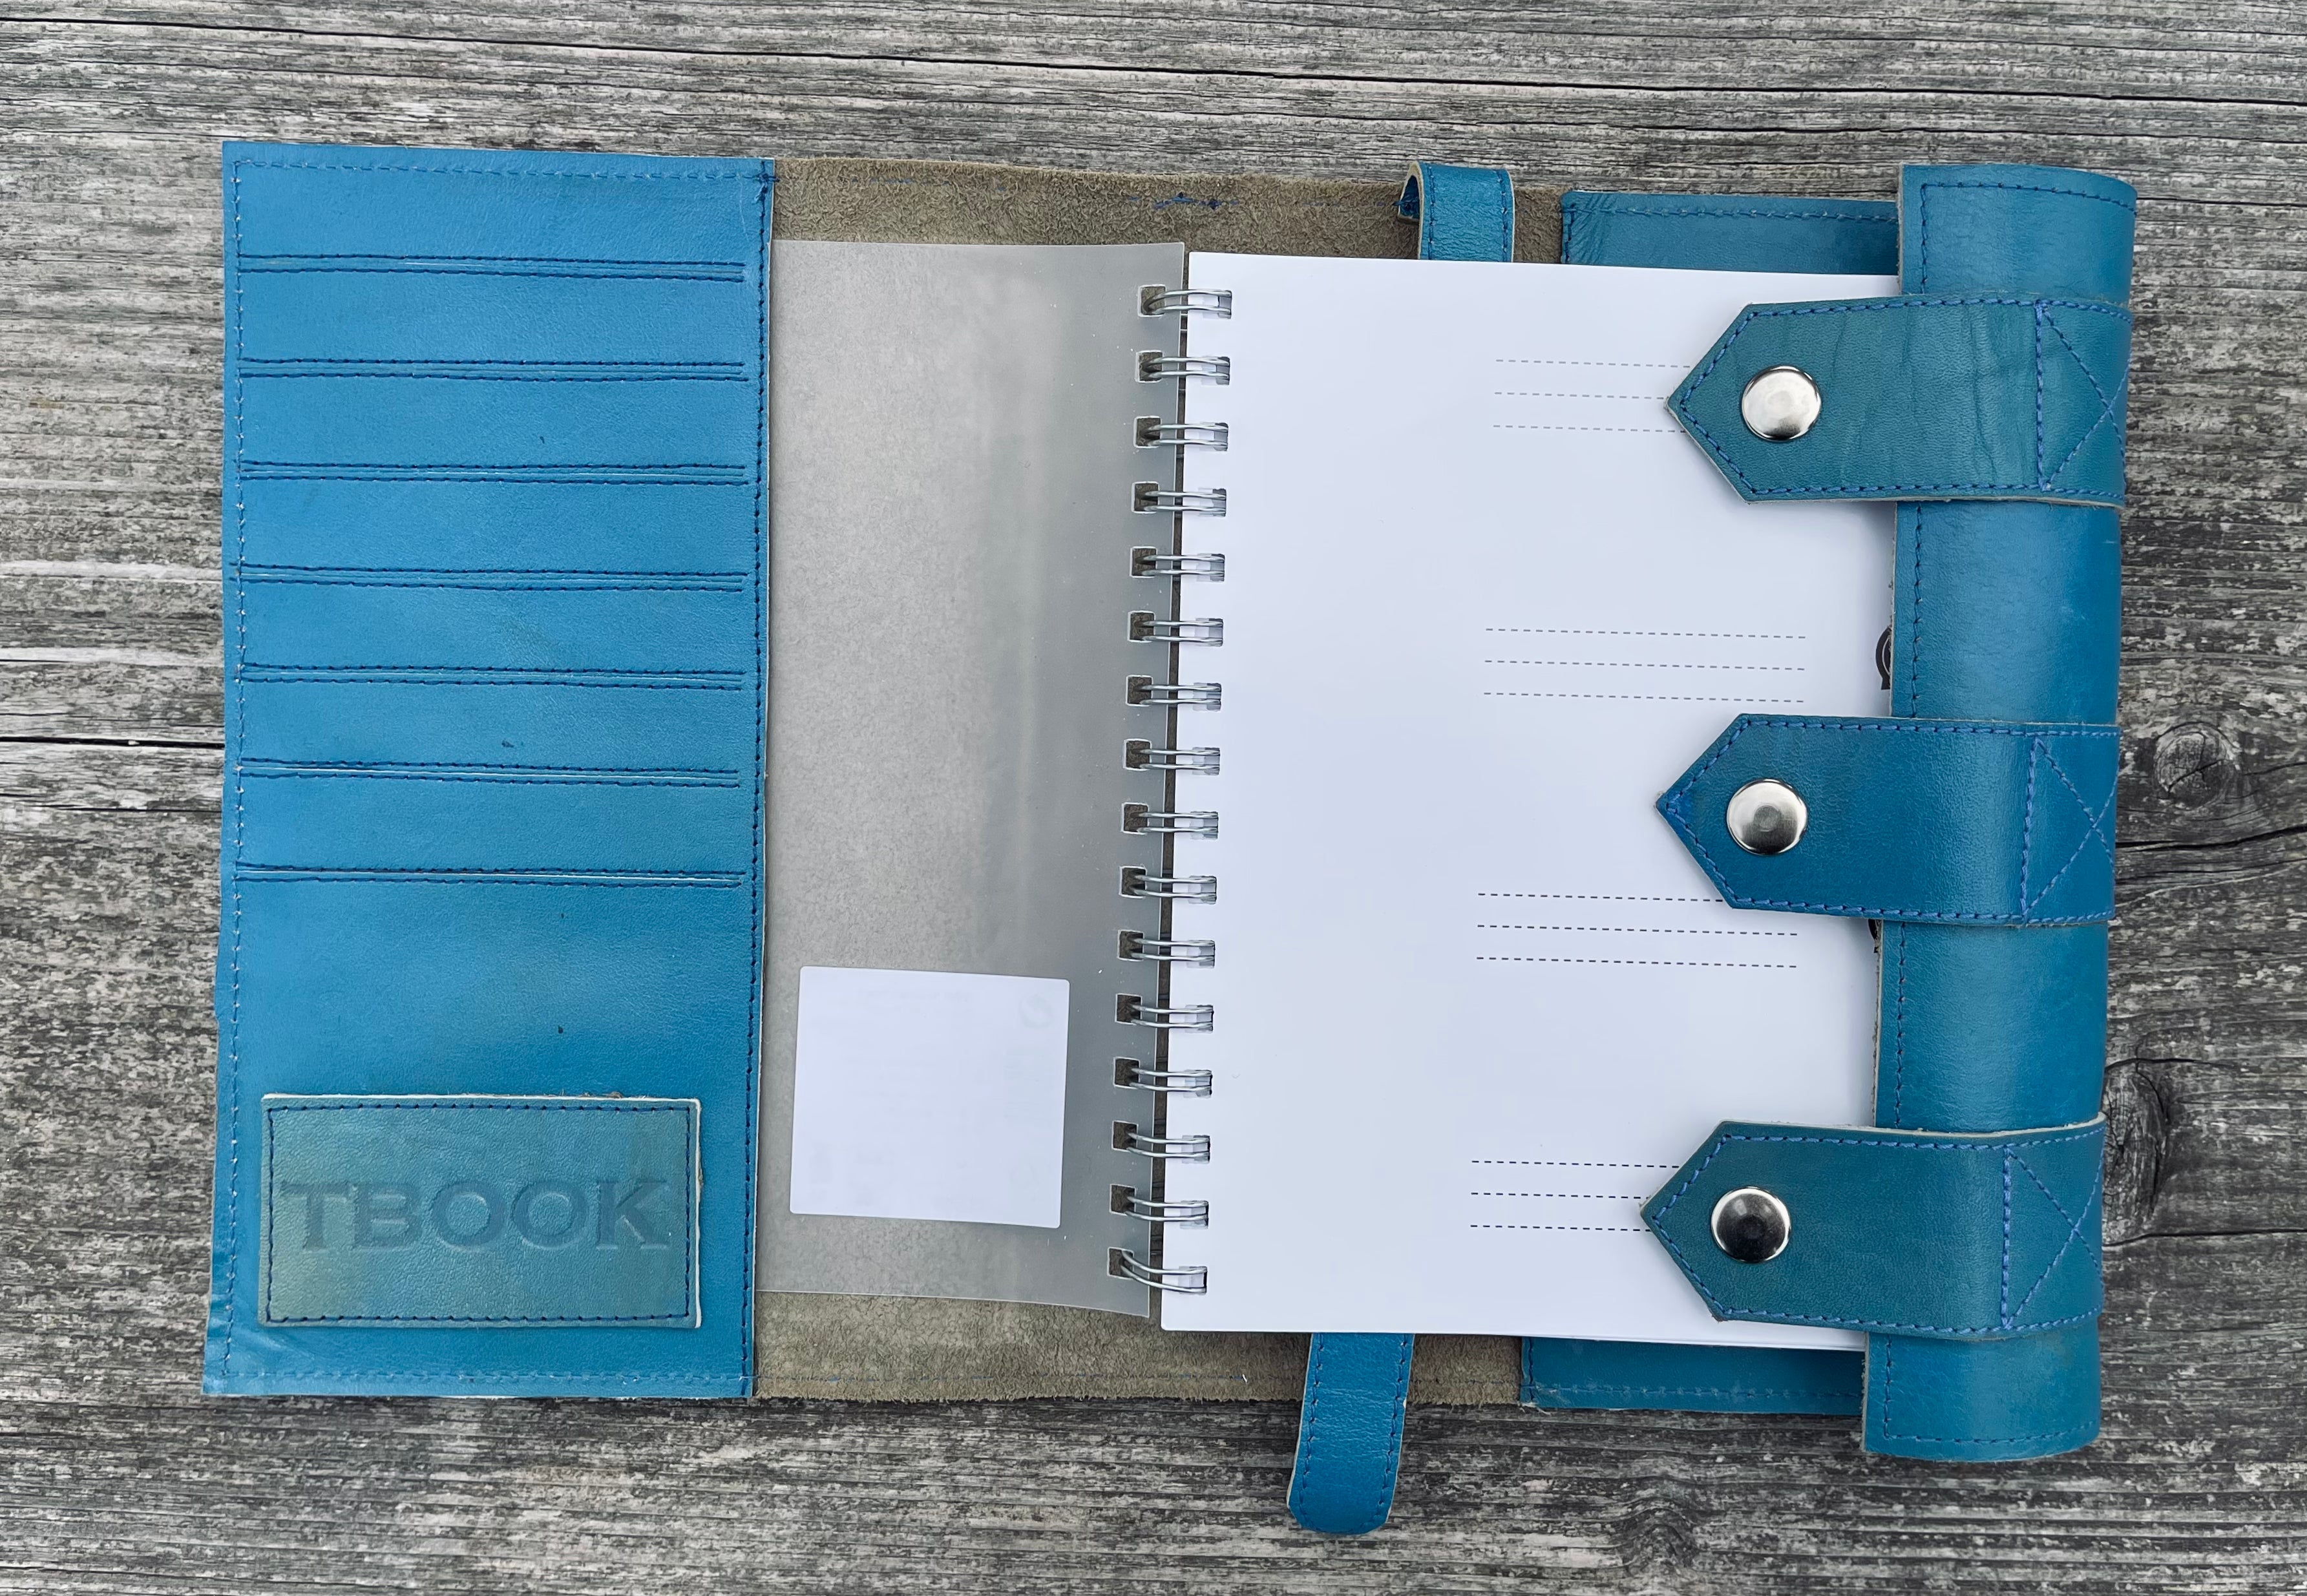 T-Book turquoise